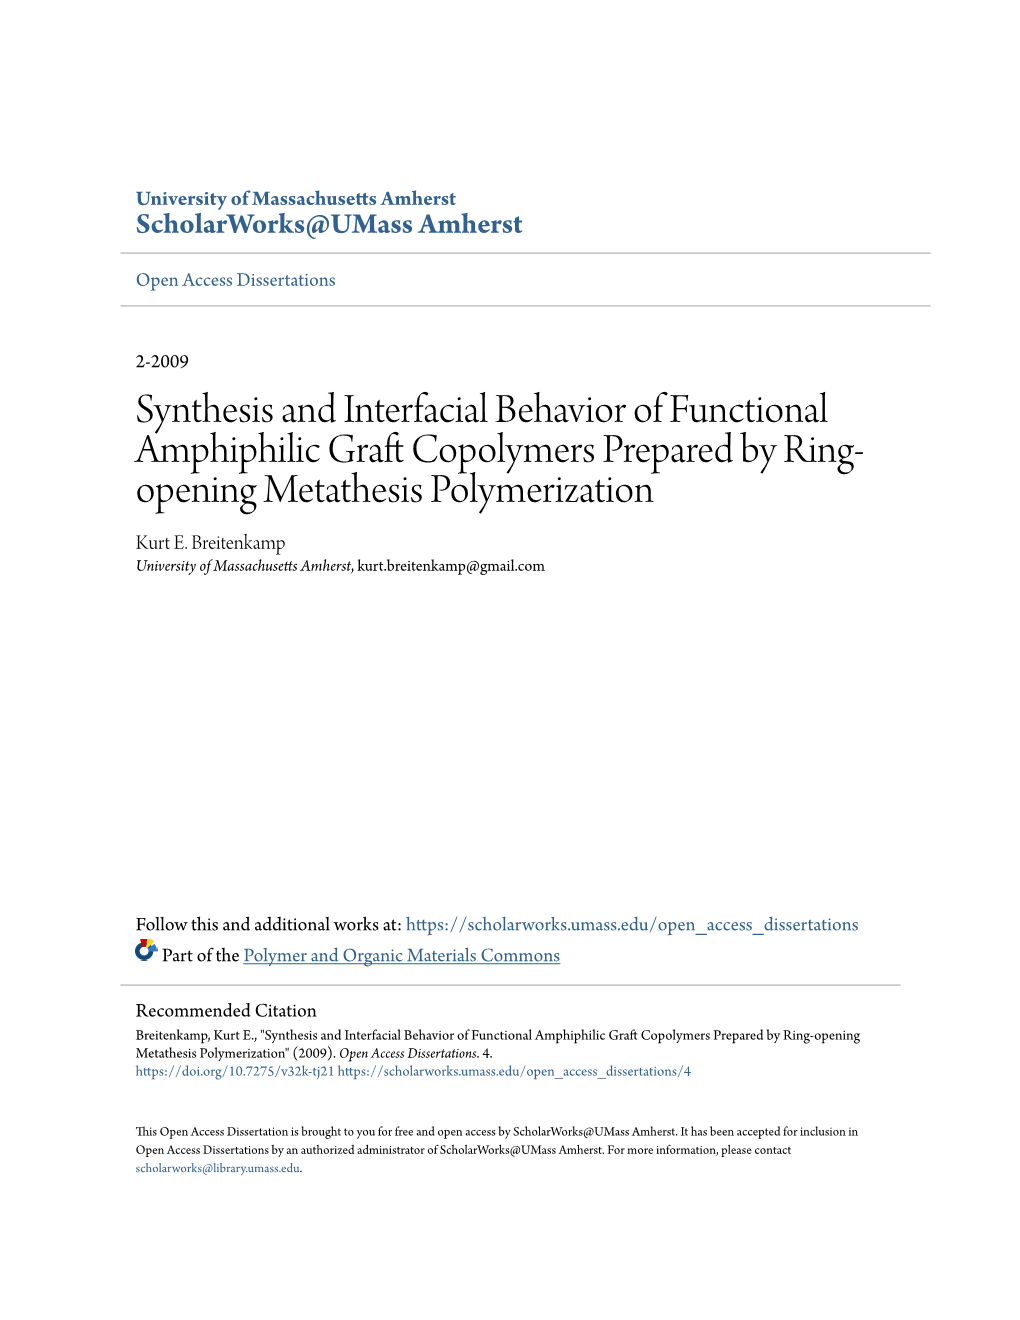 Synthesis and Interfacial Behavior of Functional Amphiphilic Graft Copolymers Prepared by Ring-Opening Metathesis Polymerization